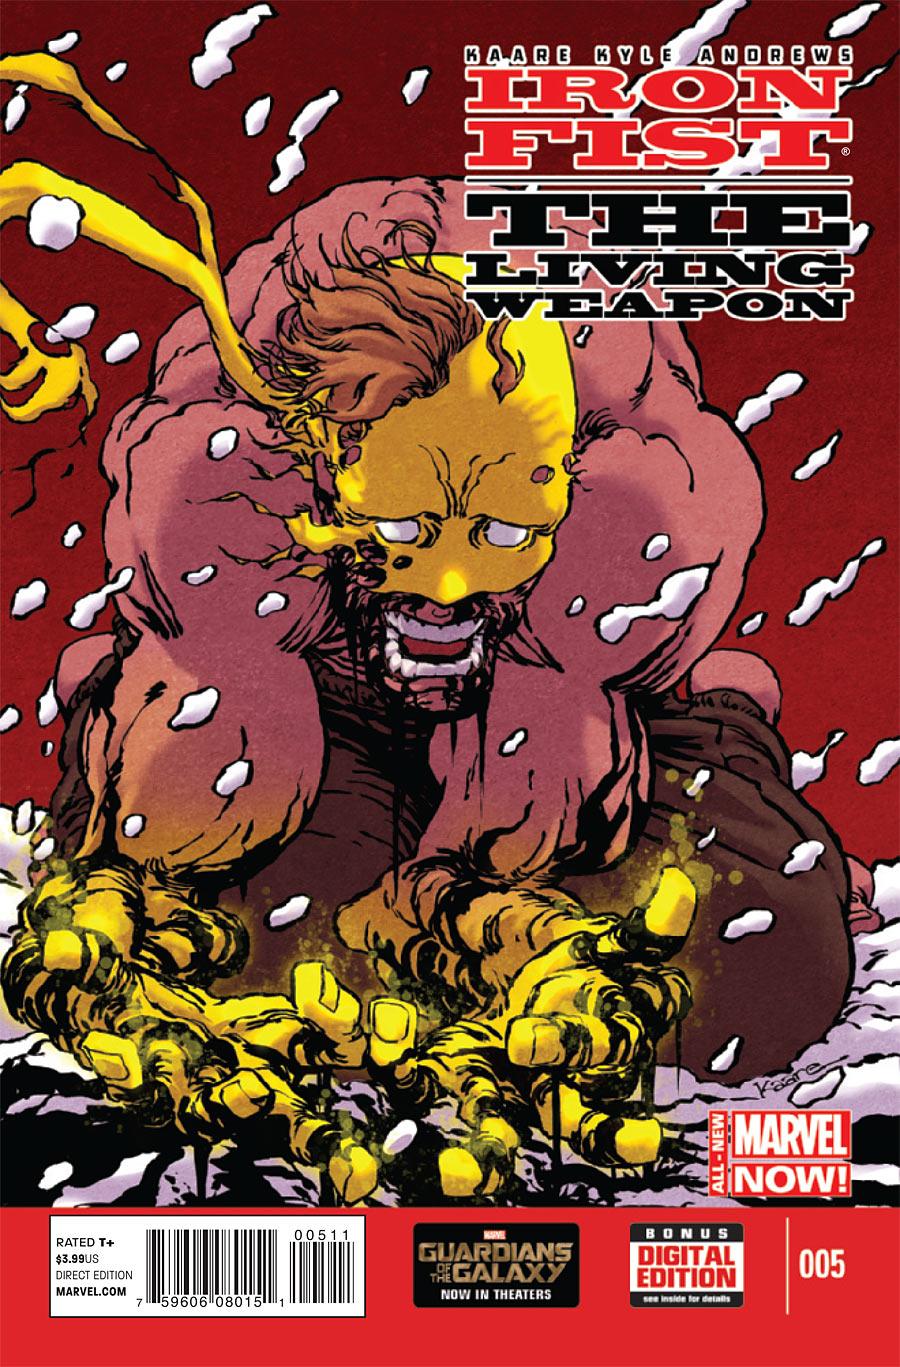 Iron Fist: The Living Weapon Vol. 1 #5